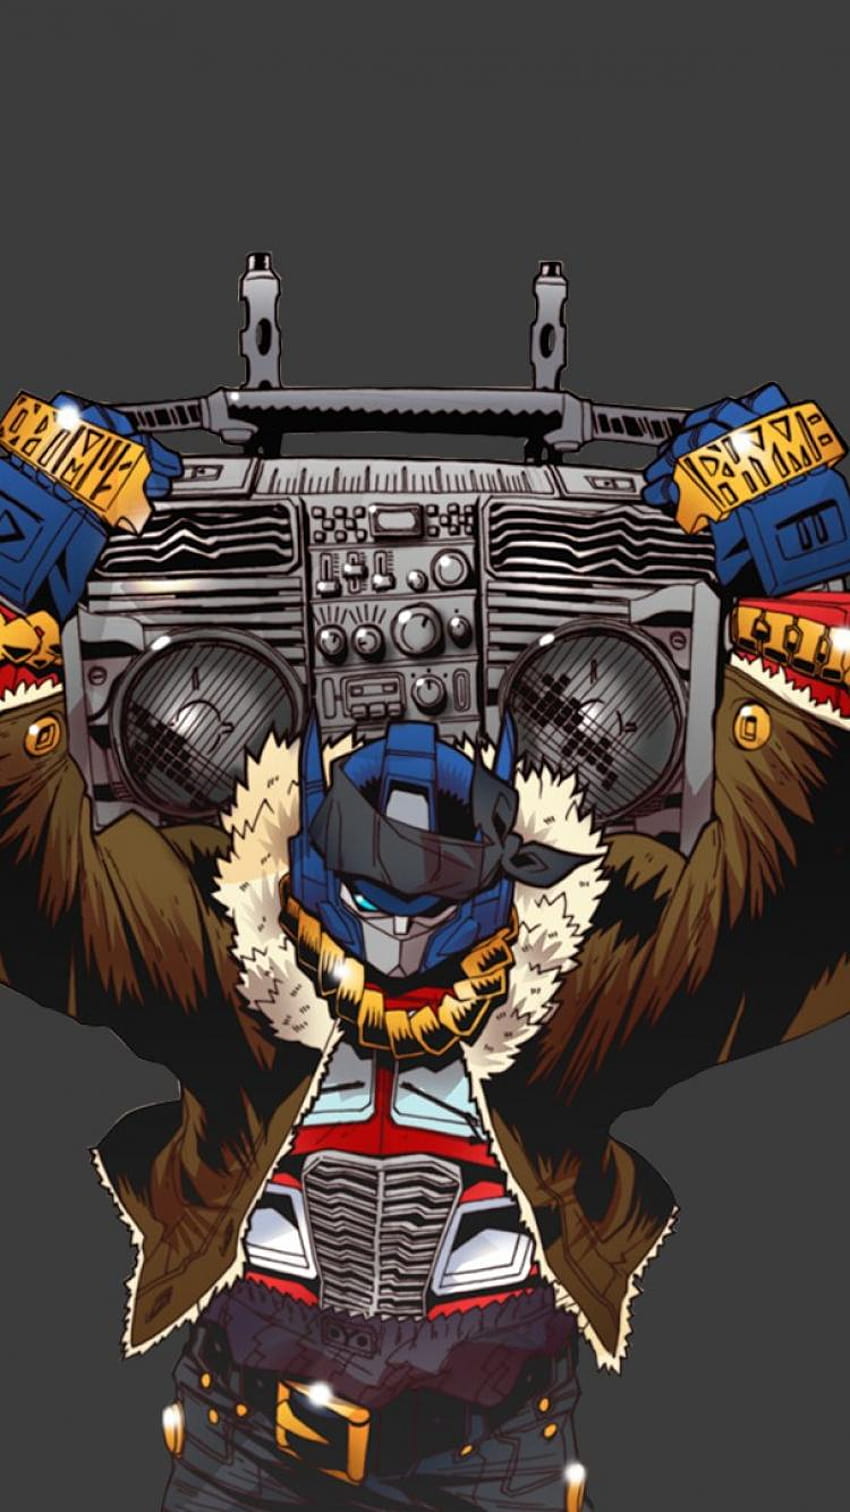 Transformers machines boombox gangster swag simple hood, gangster for iphone HD phone wallpaper